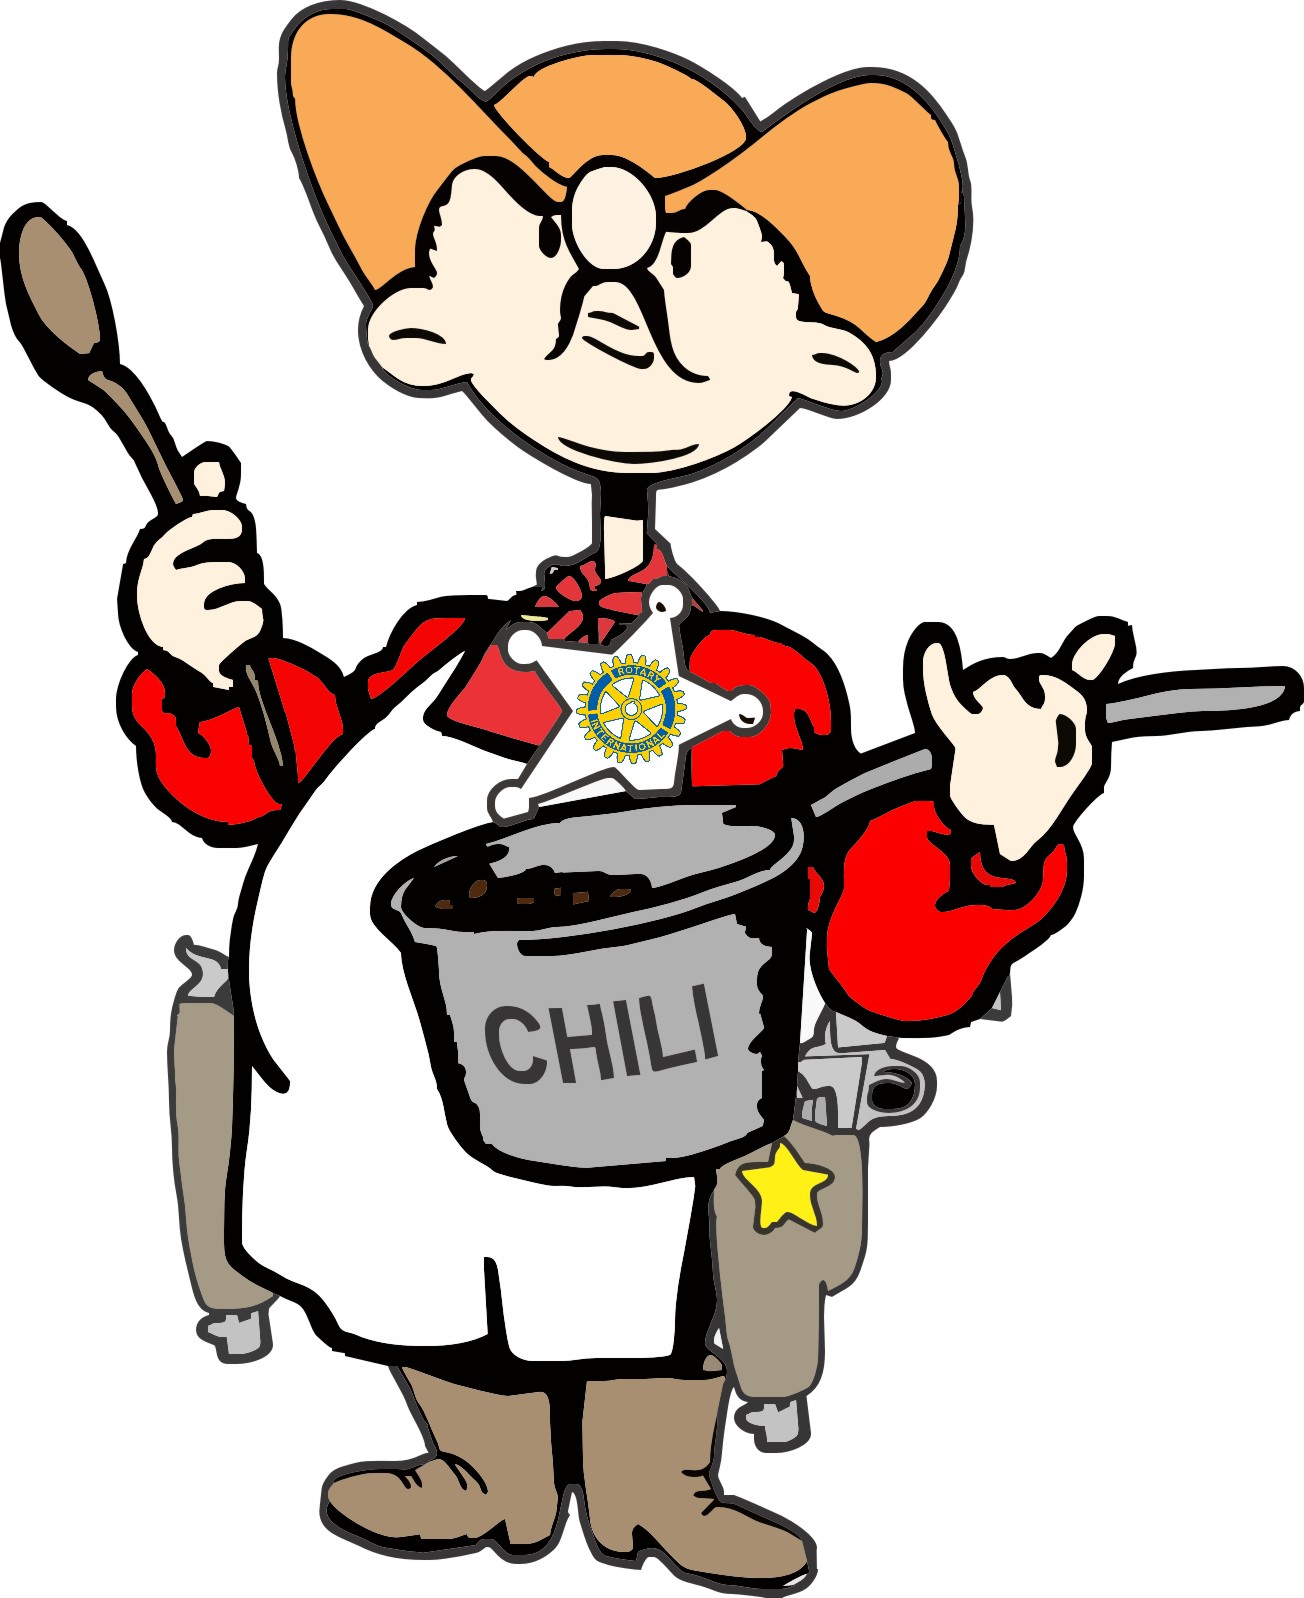 Chili Cook Off Winner Certificate | Free Download Clip Art | Free ...